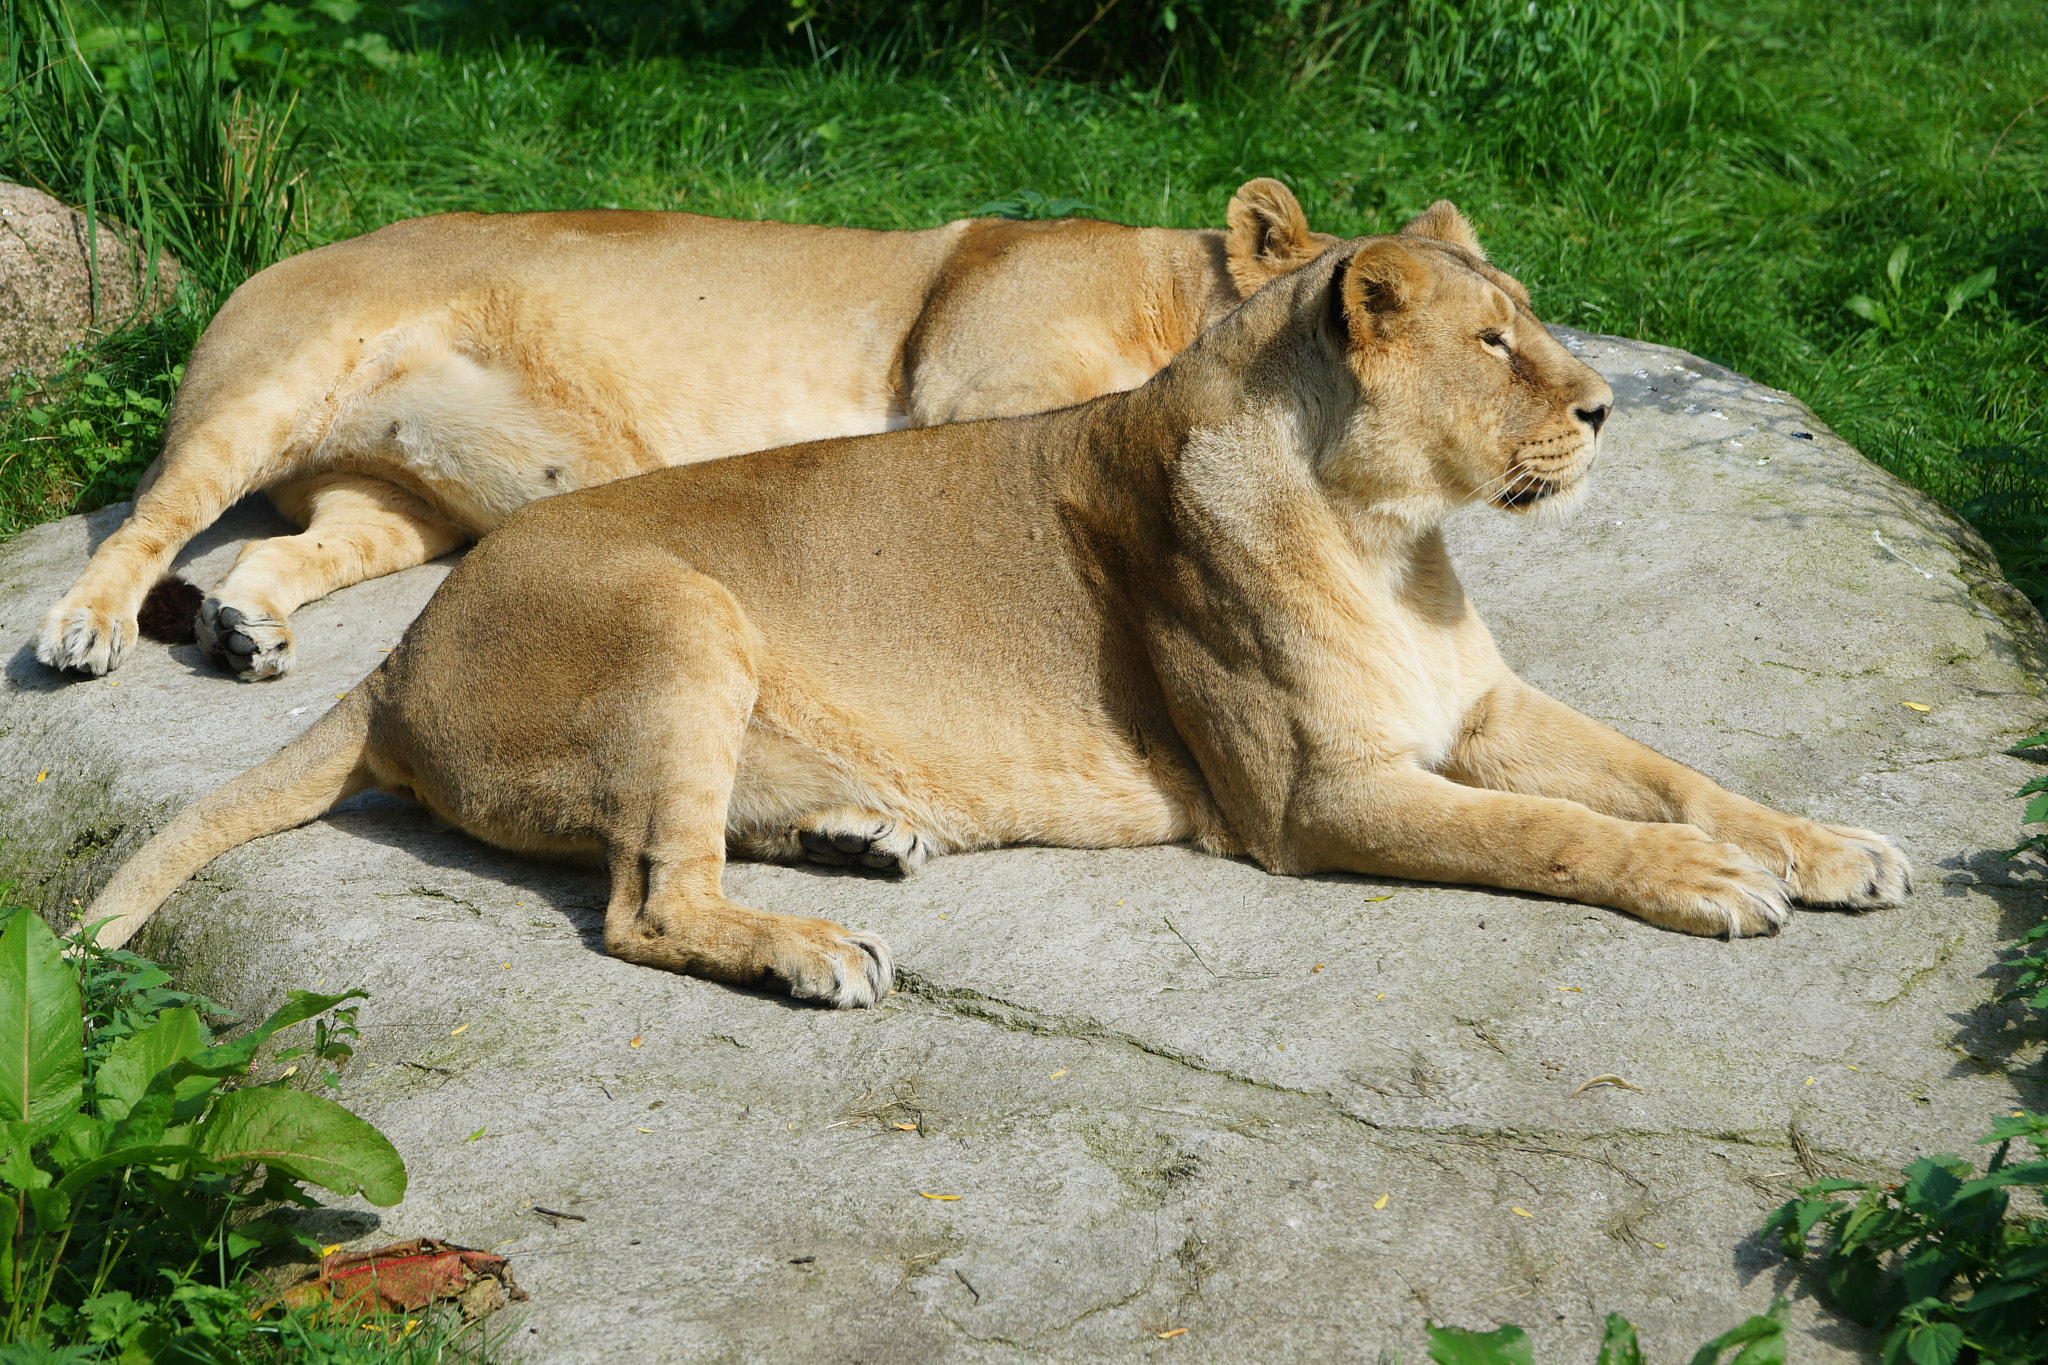 Sony a99 II sample photo. Lions in the sun photography